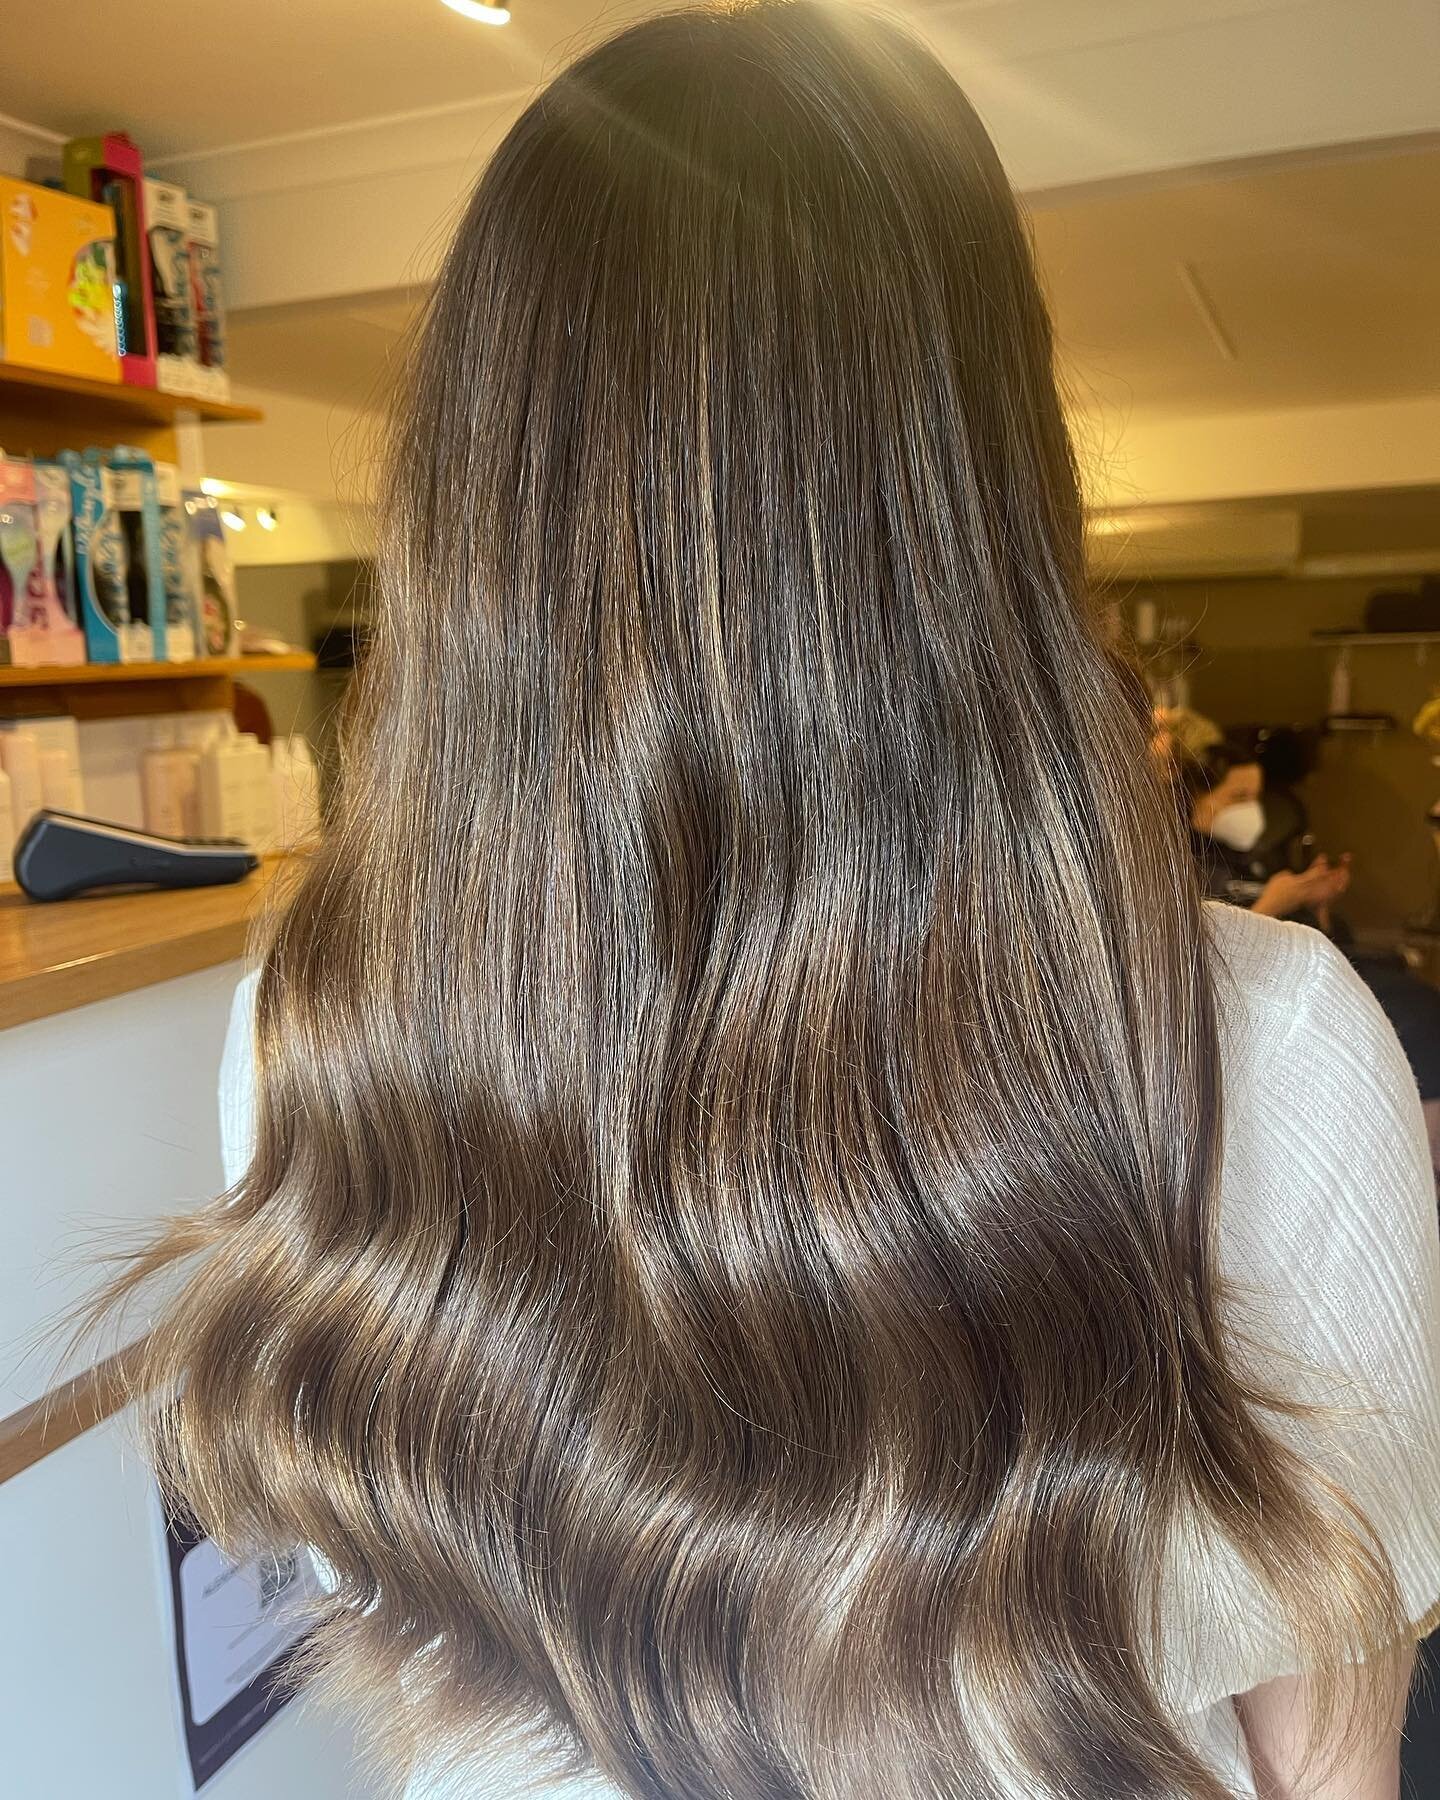 Brunette Goddess 🦋 
We love the @nakhair GLOSS range 💙 

Semi permanent, risk free coloring that leaves your hair so silky &amp; hydrated 🌊 

Here we softly colored over some beautiful balayage foil work that will shine through a little more with 